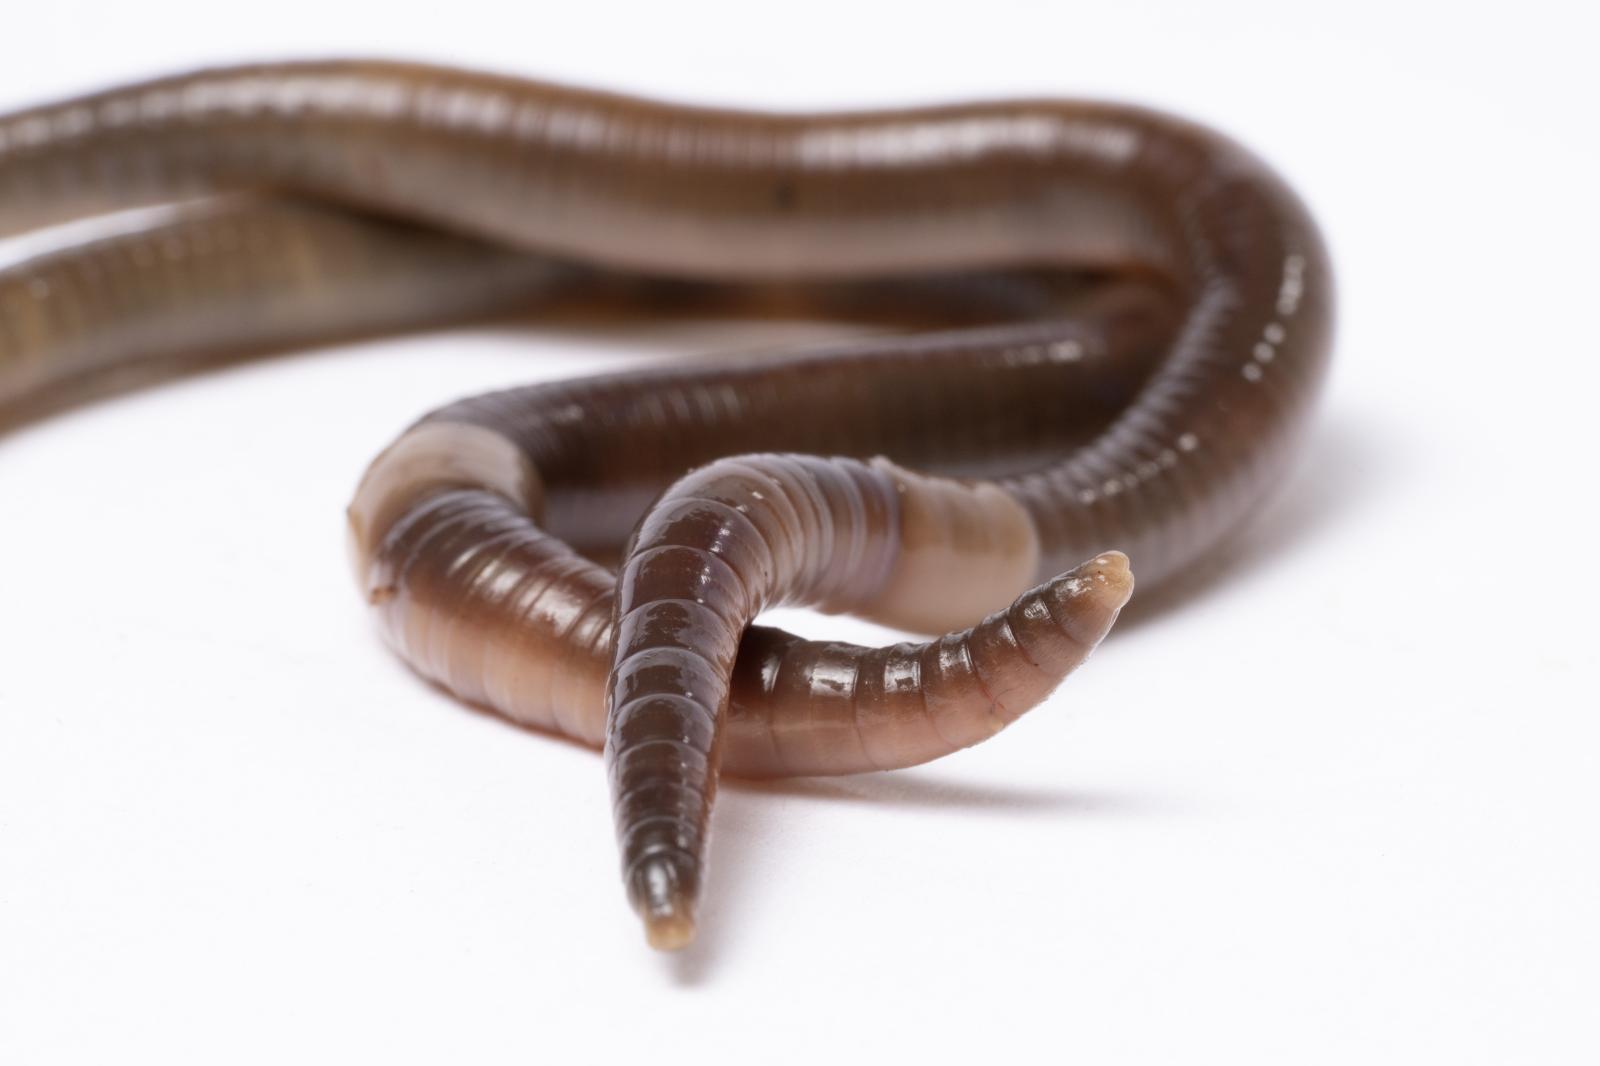 Invasive Jumping Worms | Buy this image